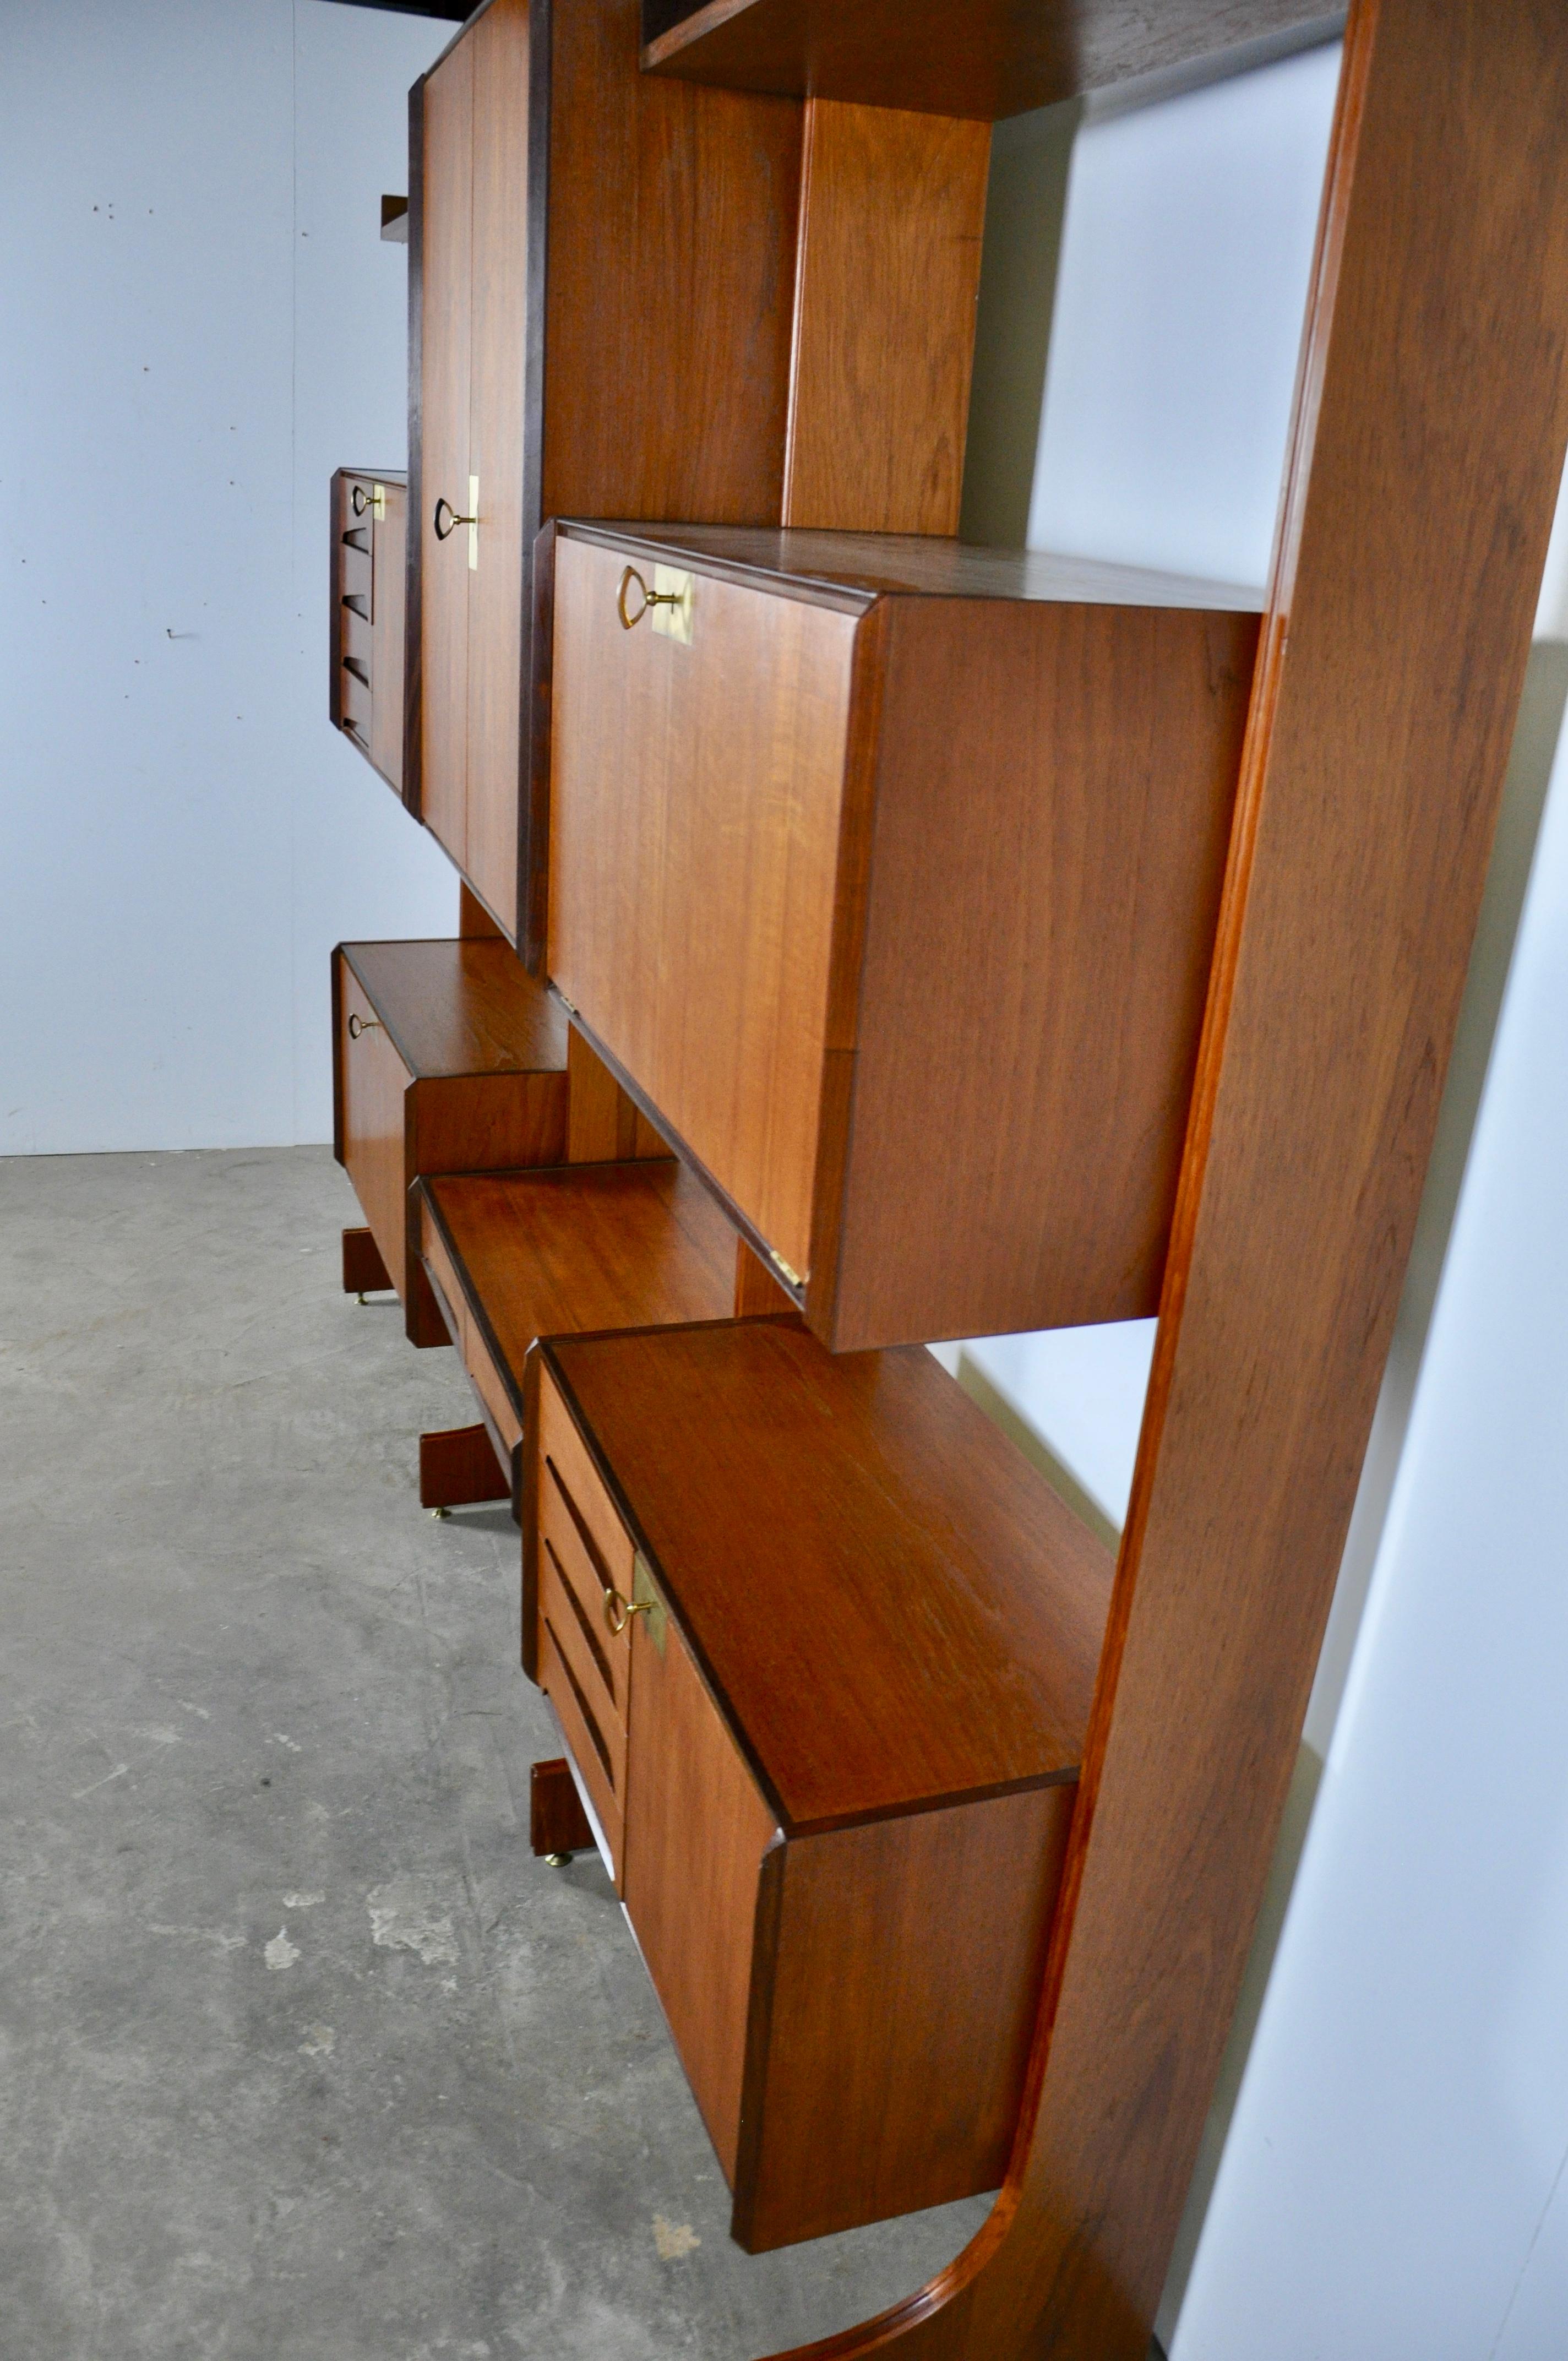 Wall unit composed of 2 boxes with hinged doors, 2 boxes with 4 drawers and a door. 1 box with 2 drawers, 1 box with 2 doors and 3 storage boards, 4 boards and 4 uprights. Brass lock with keys.